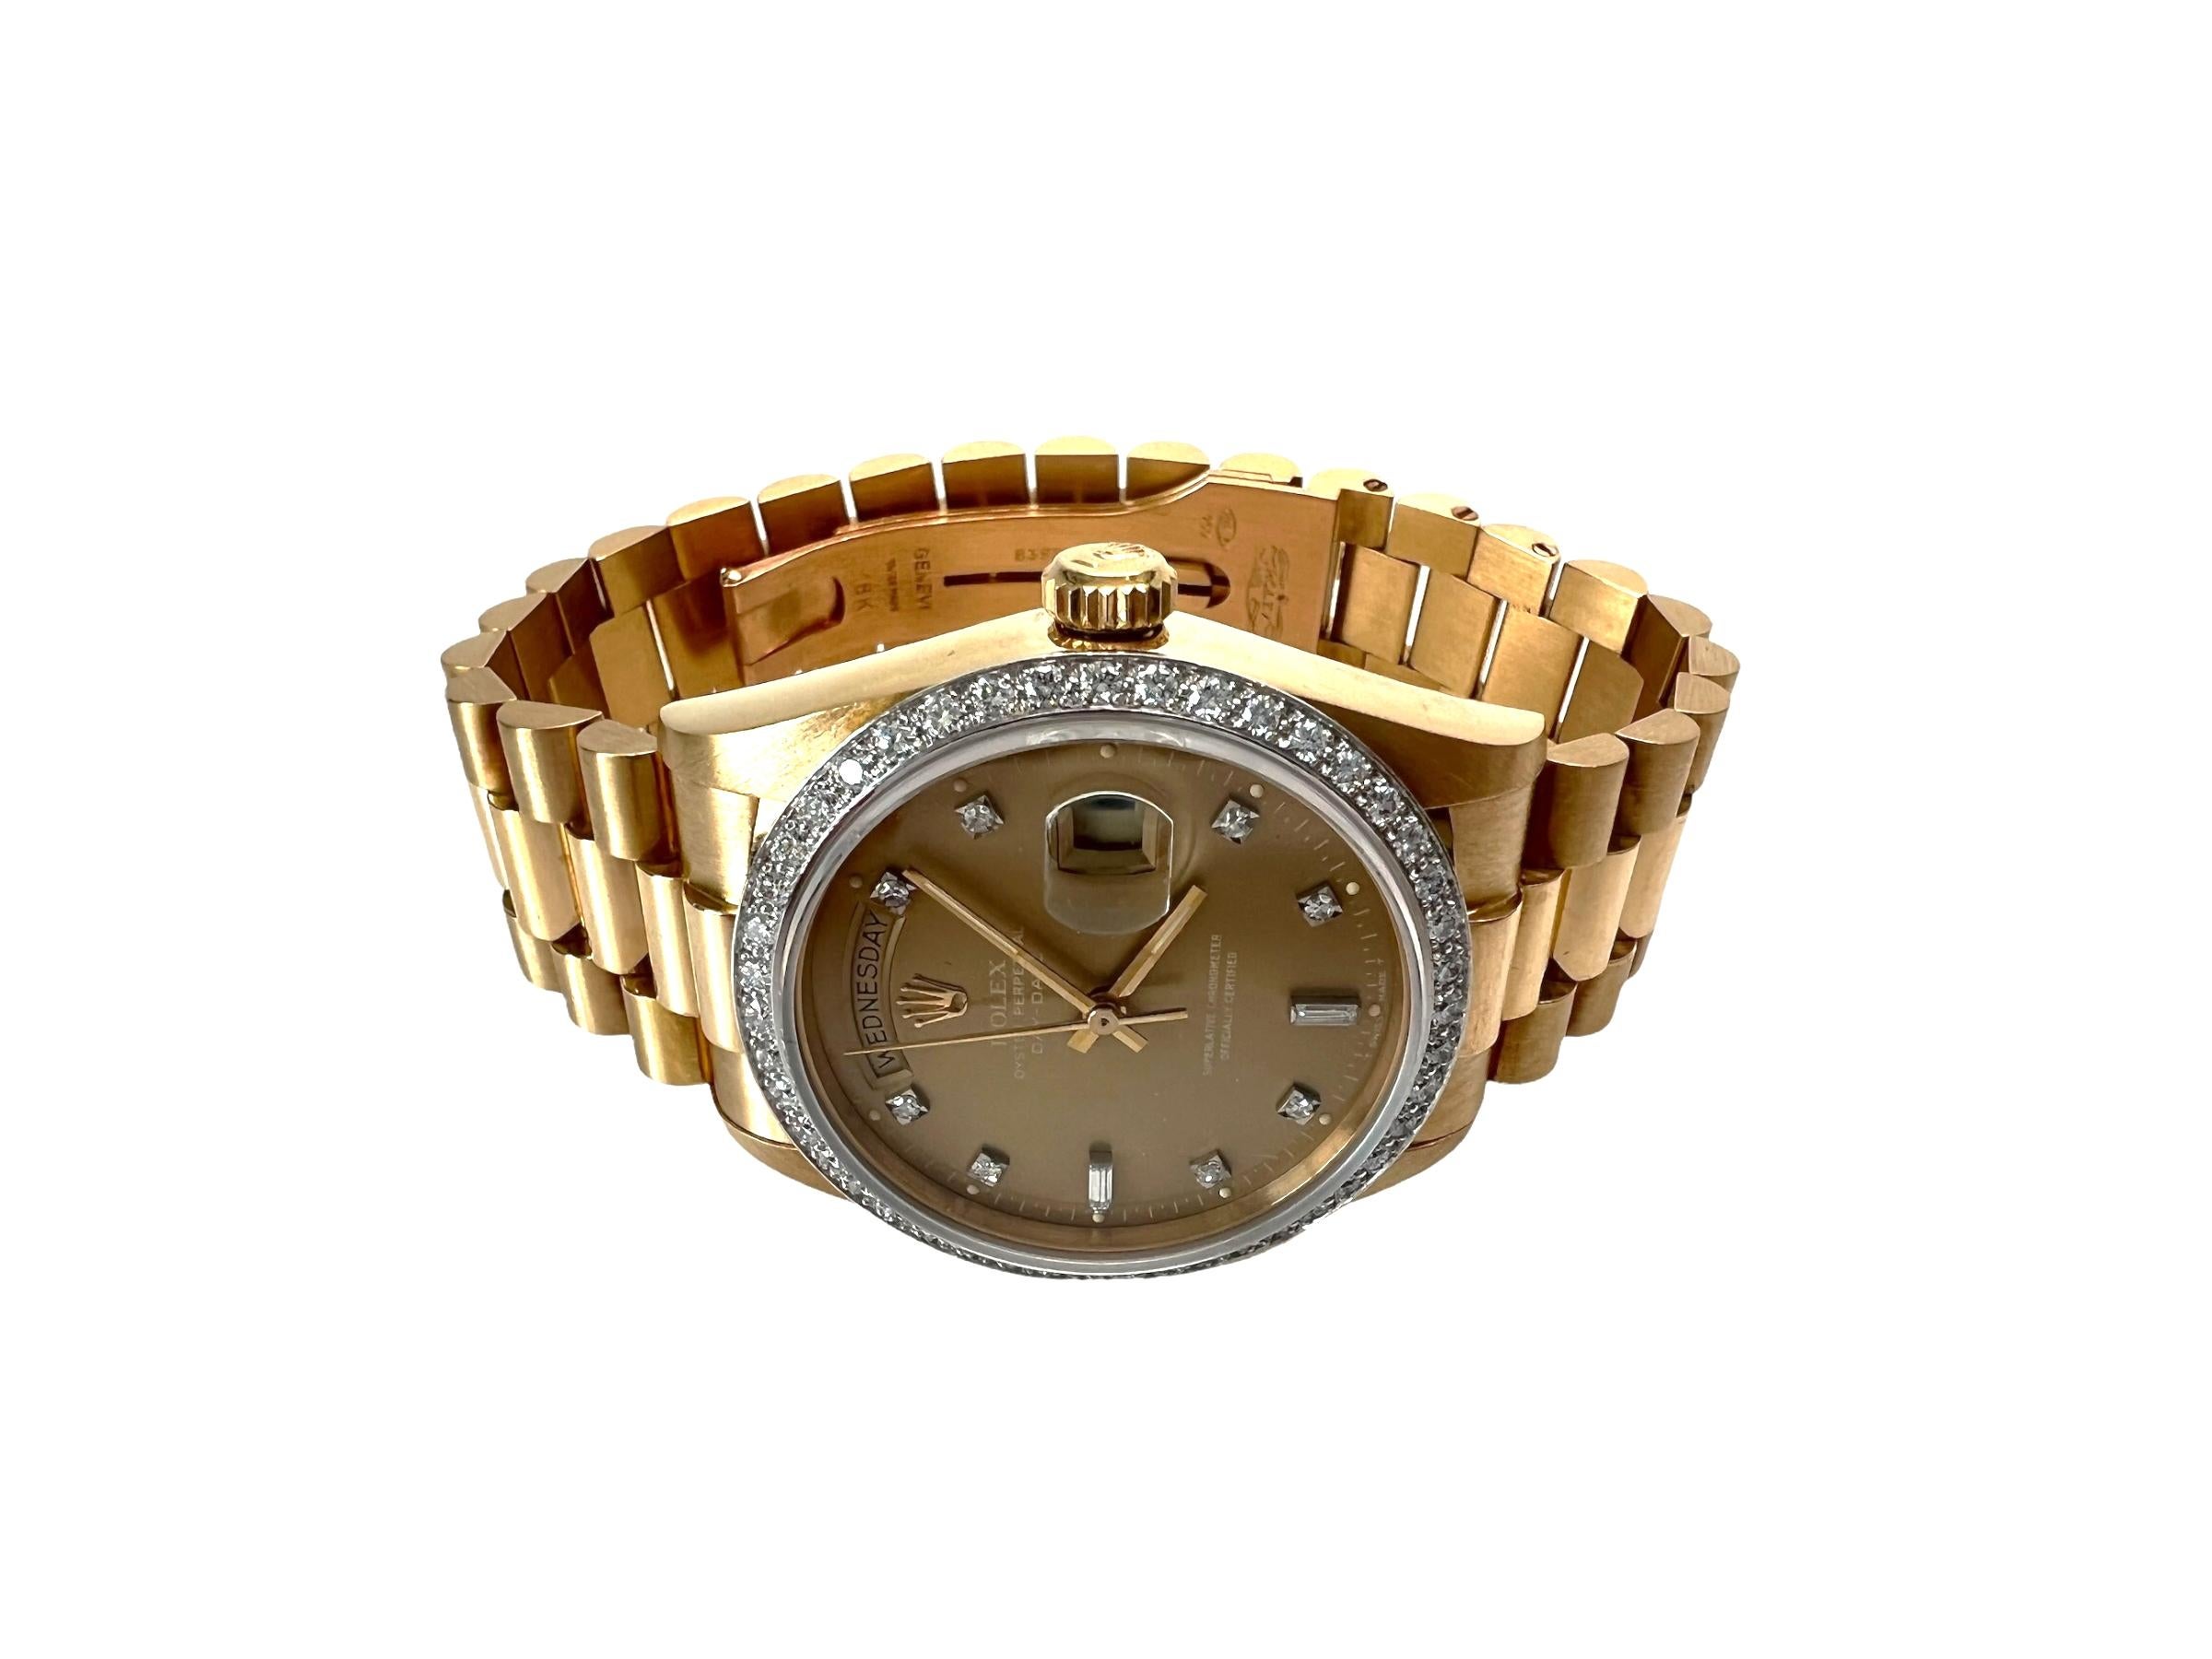 1985 Rolex 18K Yellow Gold President Watch

Model: 18048
Serial: 8824845

This luxury Rolex watch is set in 18K yellow gold. 

Fluted Bezel. Champagne Diamond Dial. Day Dial at 12 and date at the 3

Rolex factory diamond bezel. The bezel was not